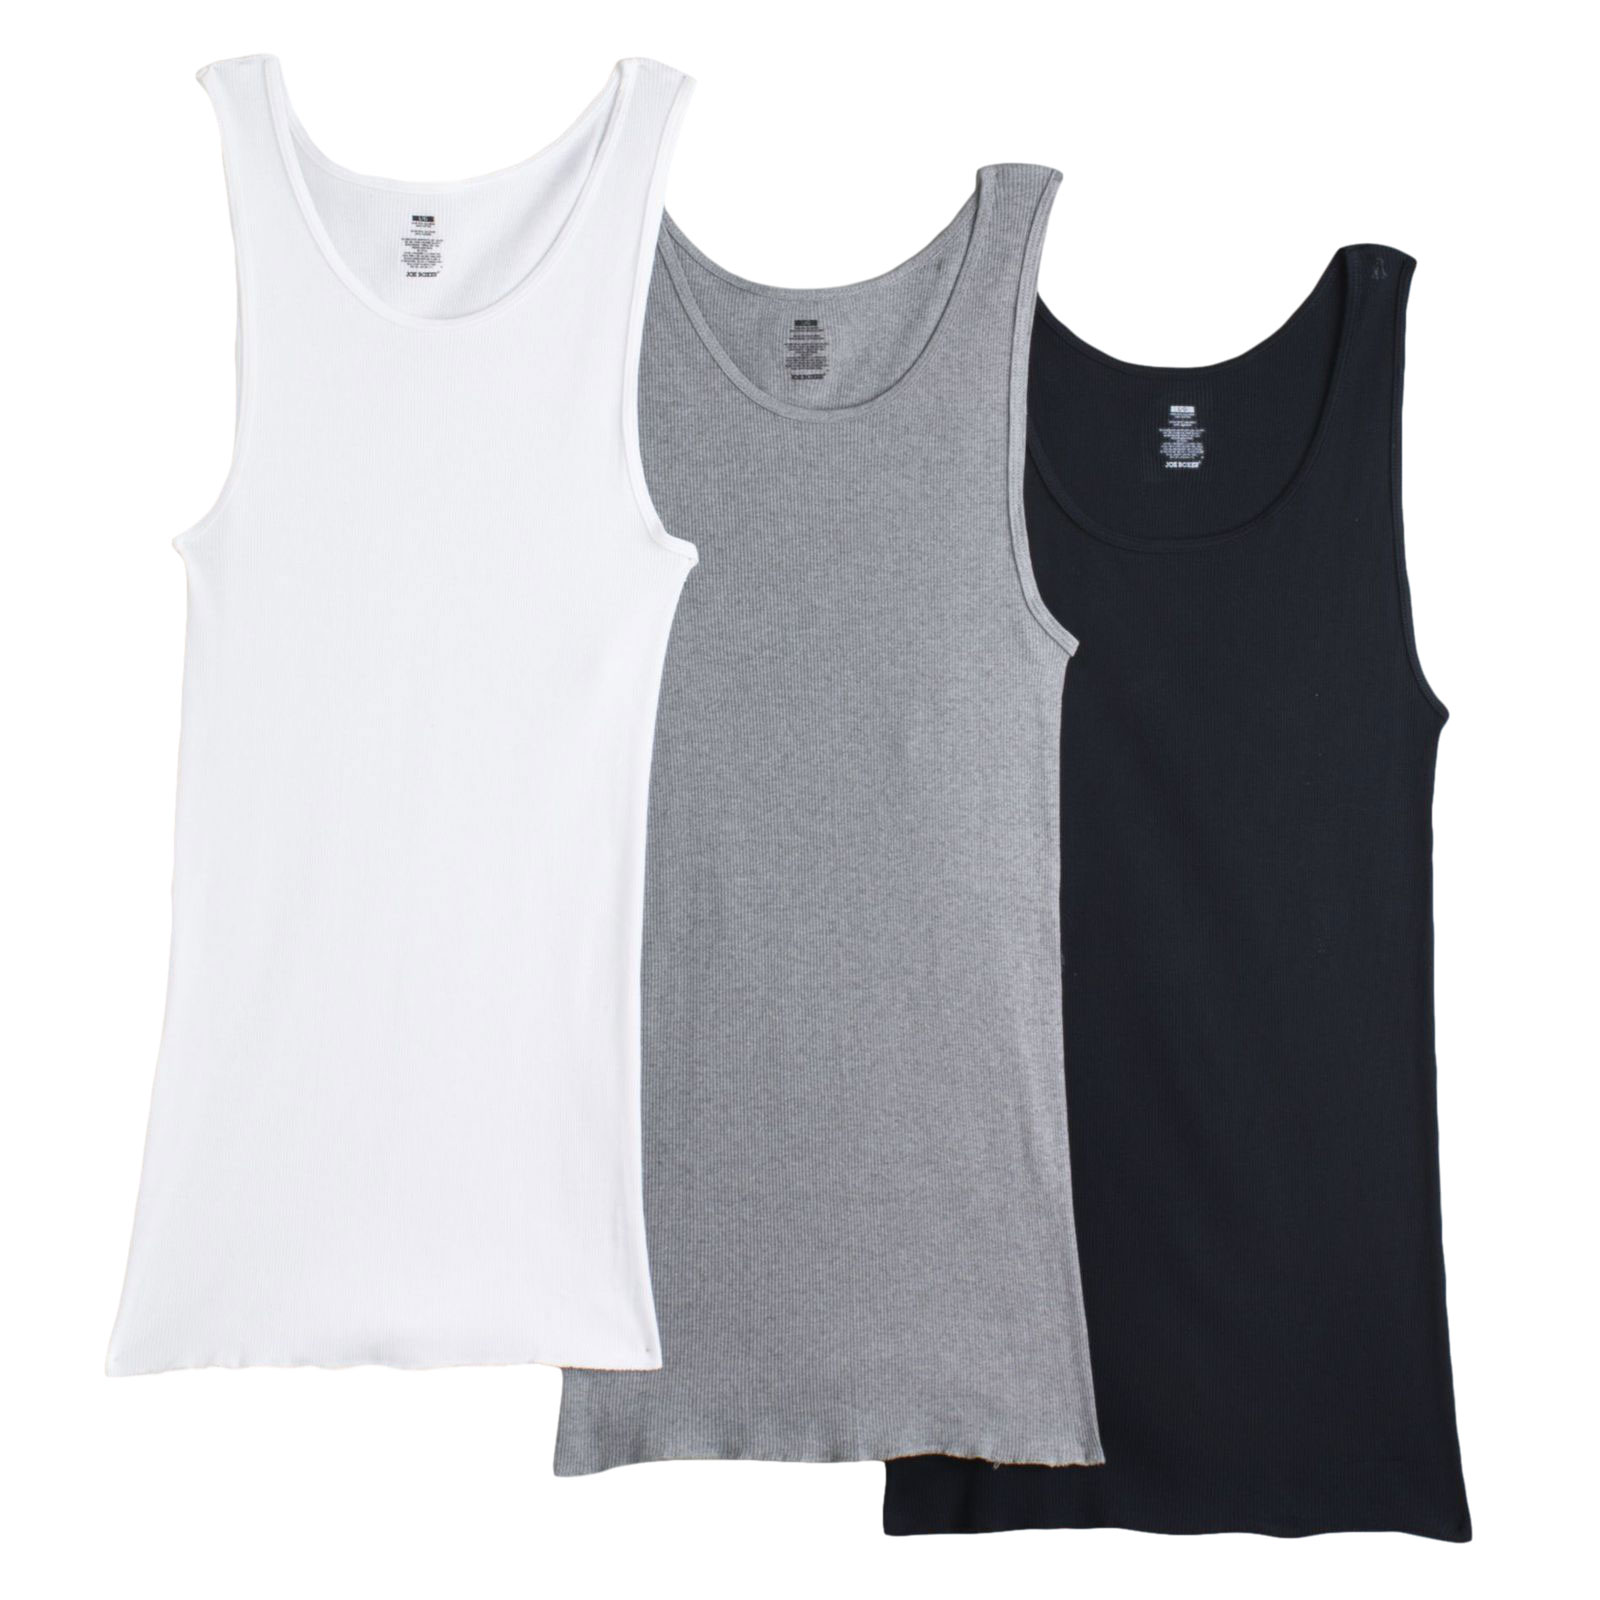 Men's A-Shirt Tee - 3 Pack - Assorted Colors